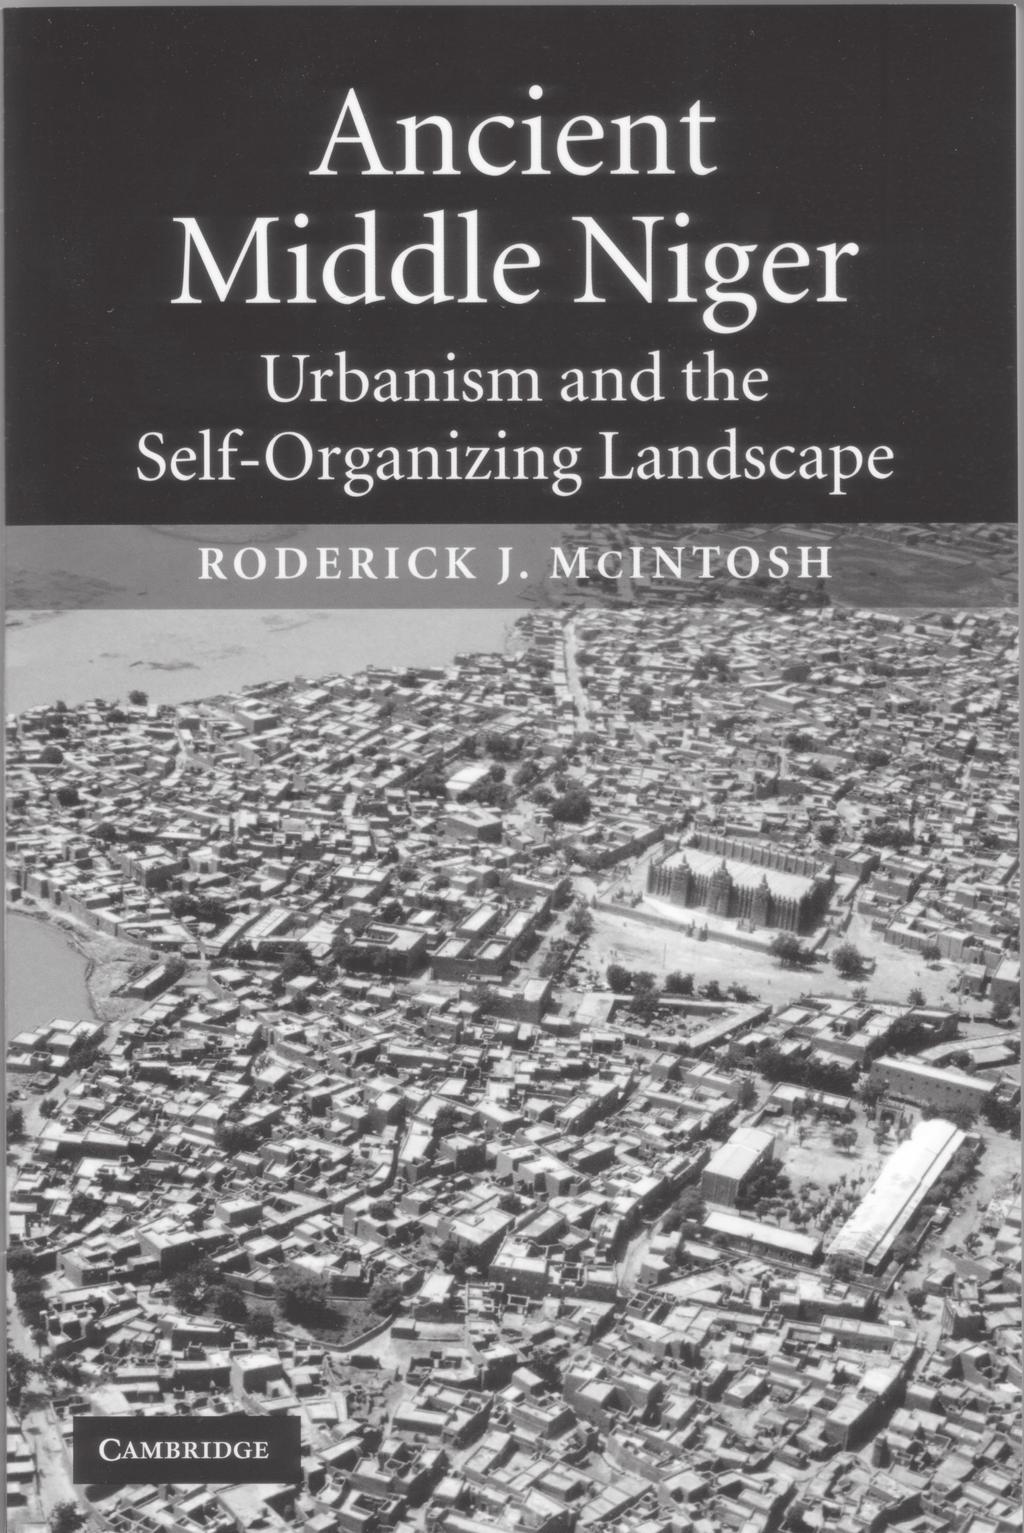 BOOK REVIEW Ancient Middle Niger: Urbanism and the Self-Organizing Landscape. By Roderick J. McIntosh, Case Studies in Early Societies 7, Cambridge University Press, Cambridge, 278 pp.